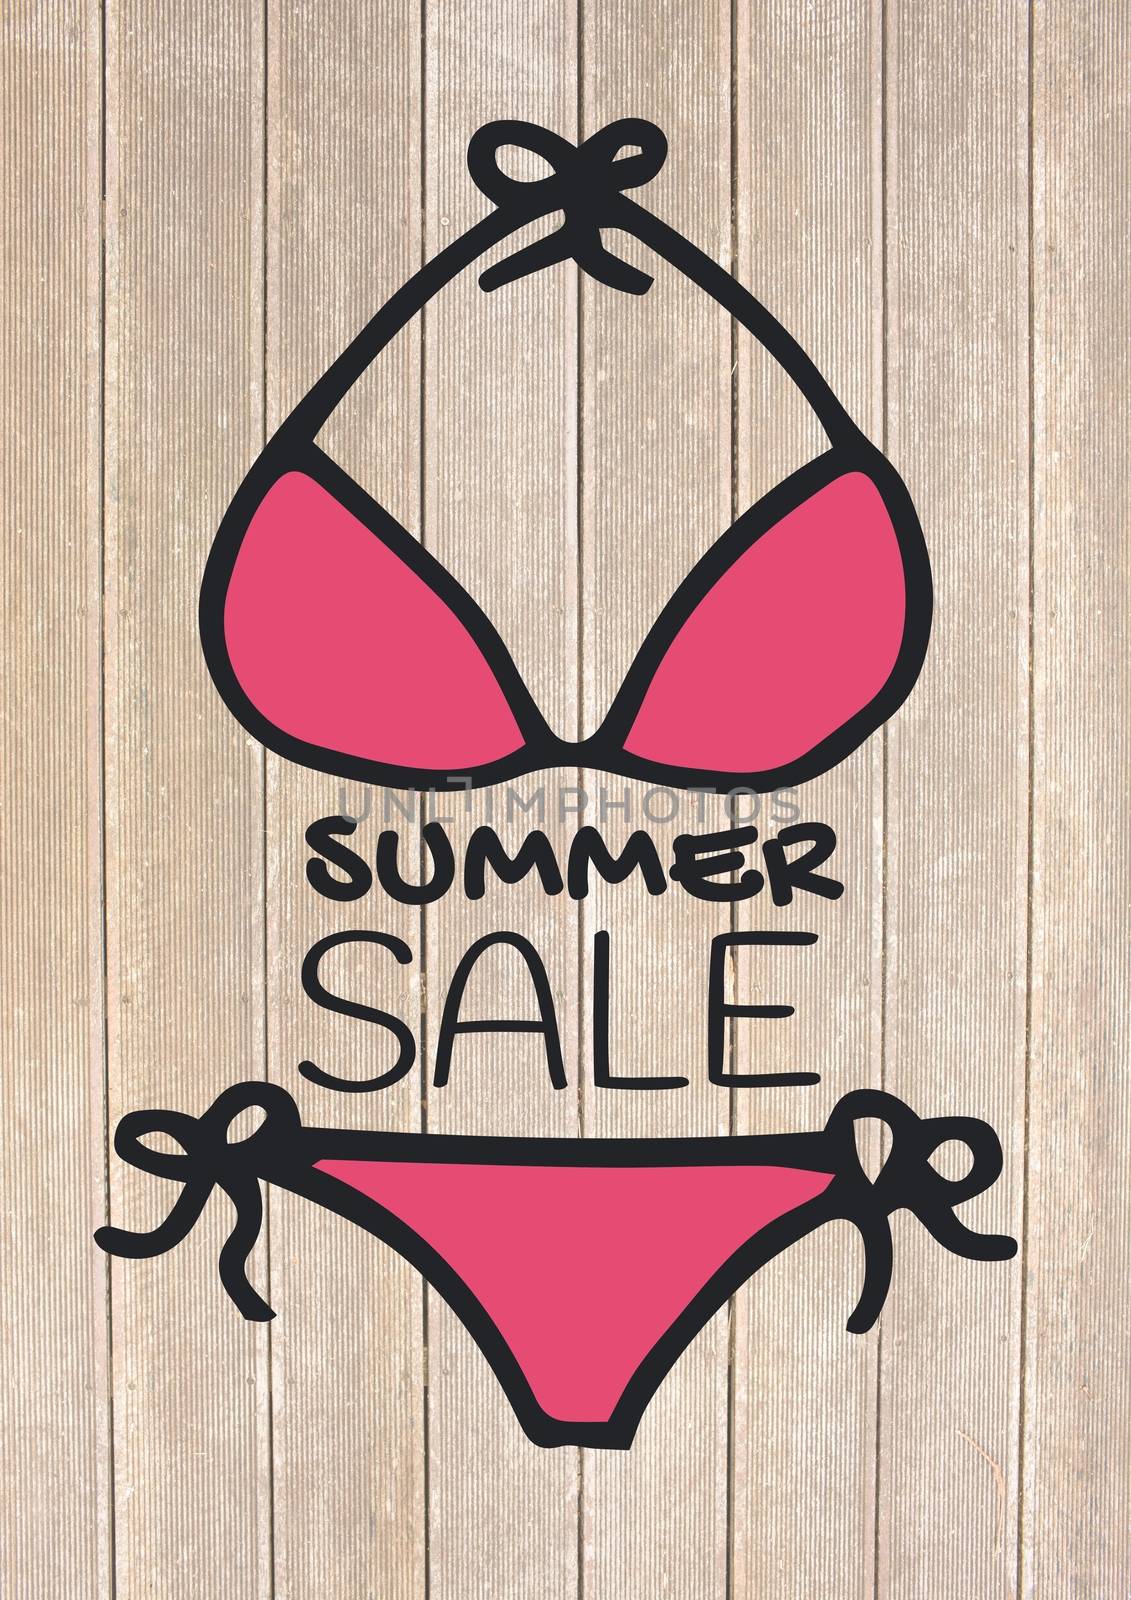 Digital composite of Summer sale text and pink bikini against decking